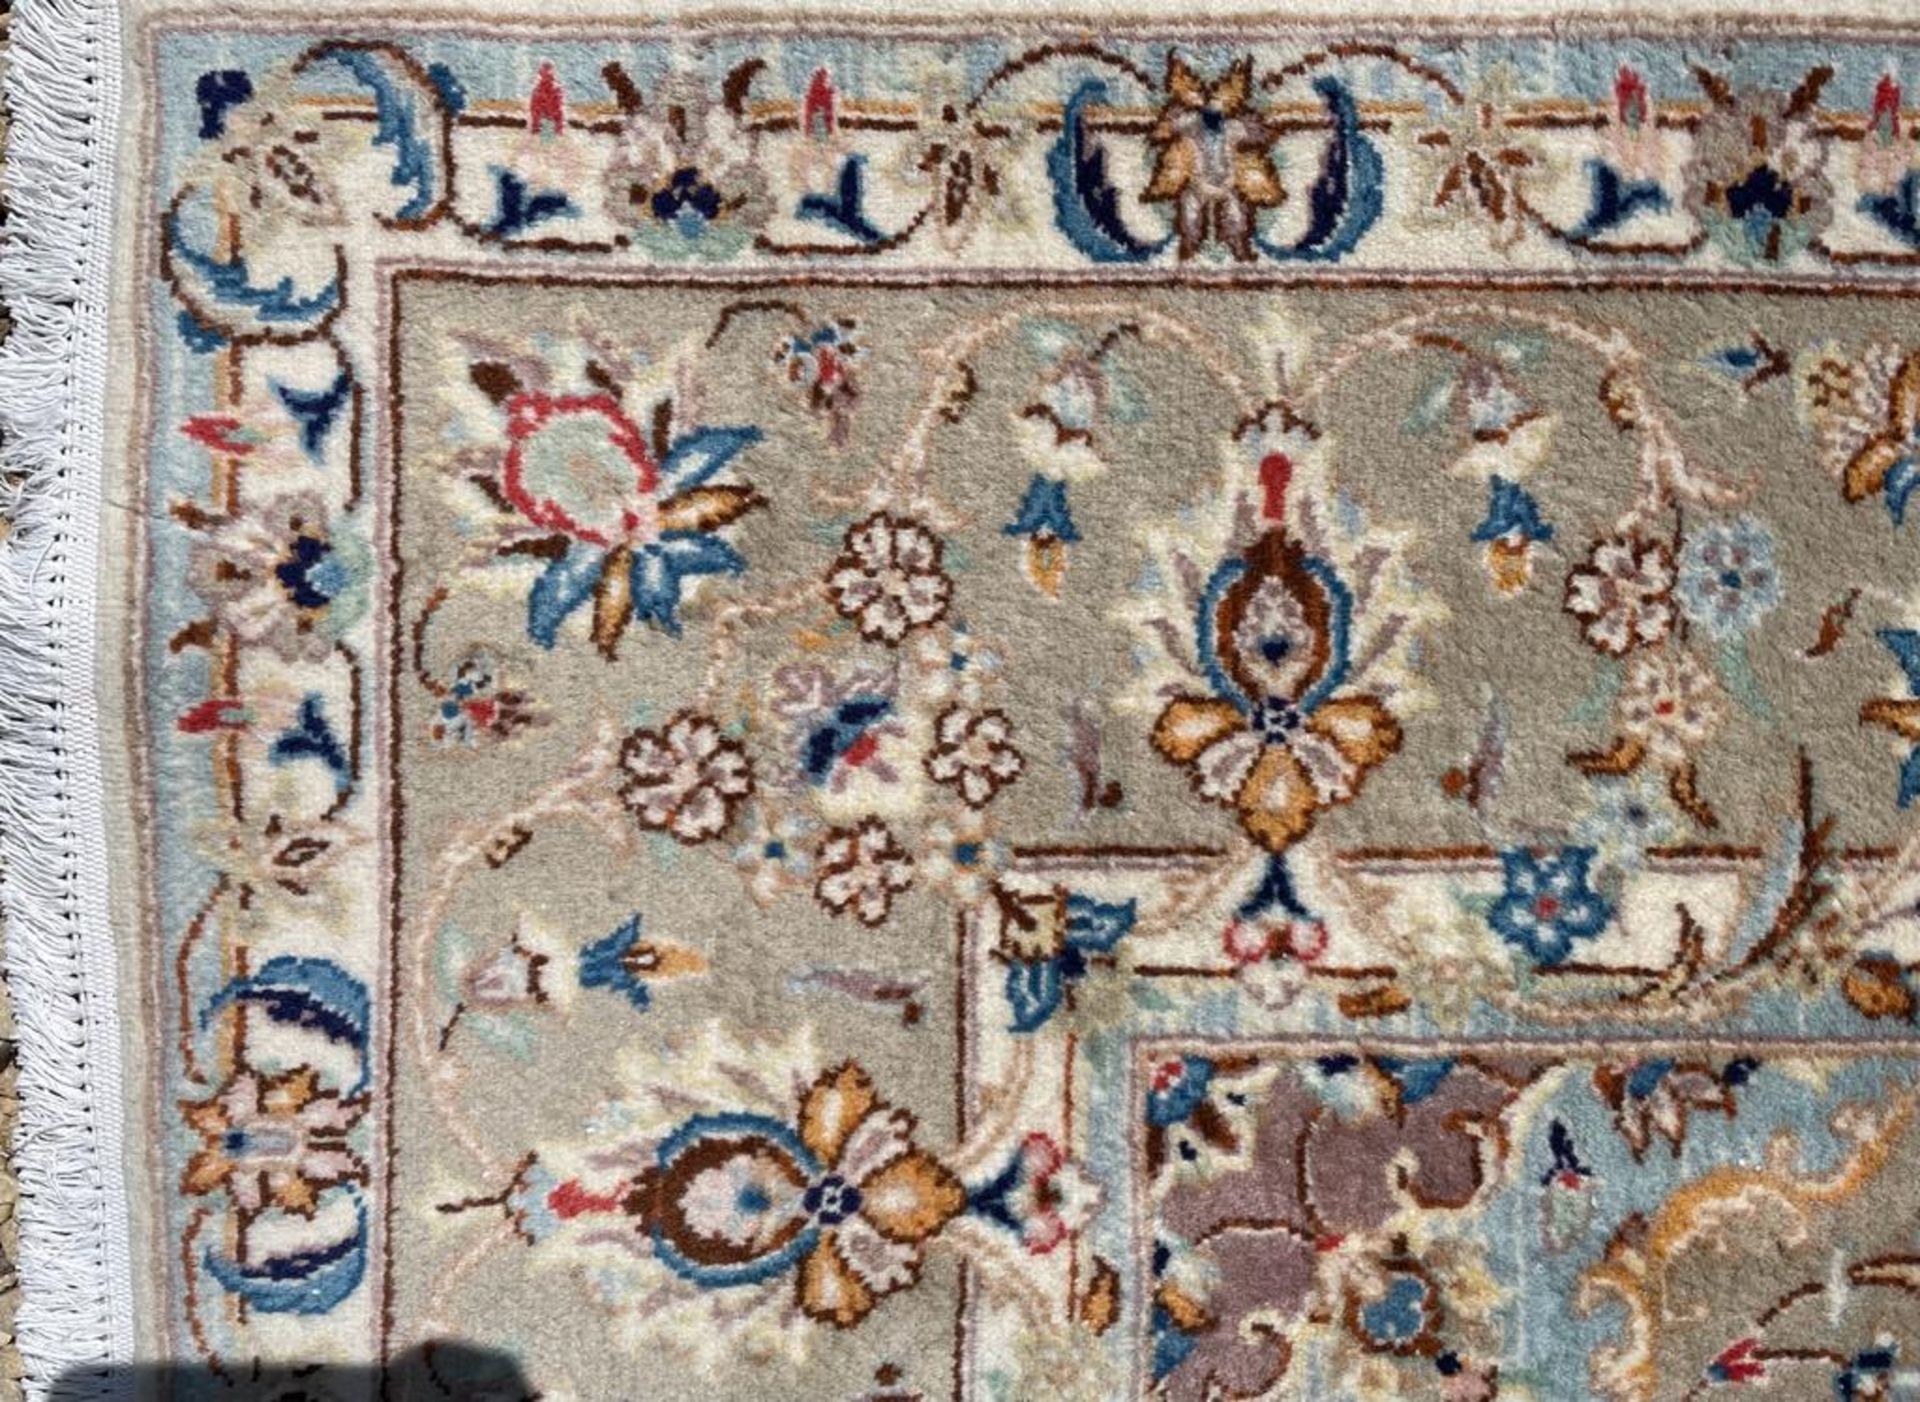 EARLY 20TH CENTURY NORTH EAST PERSIAN MESHED CARPET RUG - Image 3 of 5